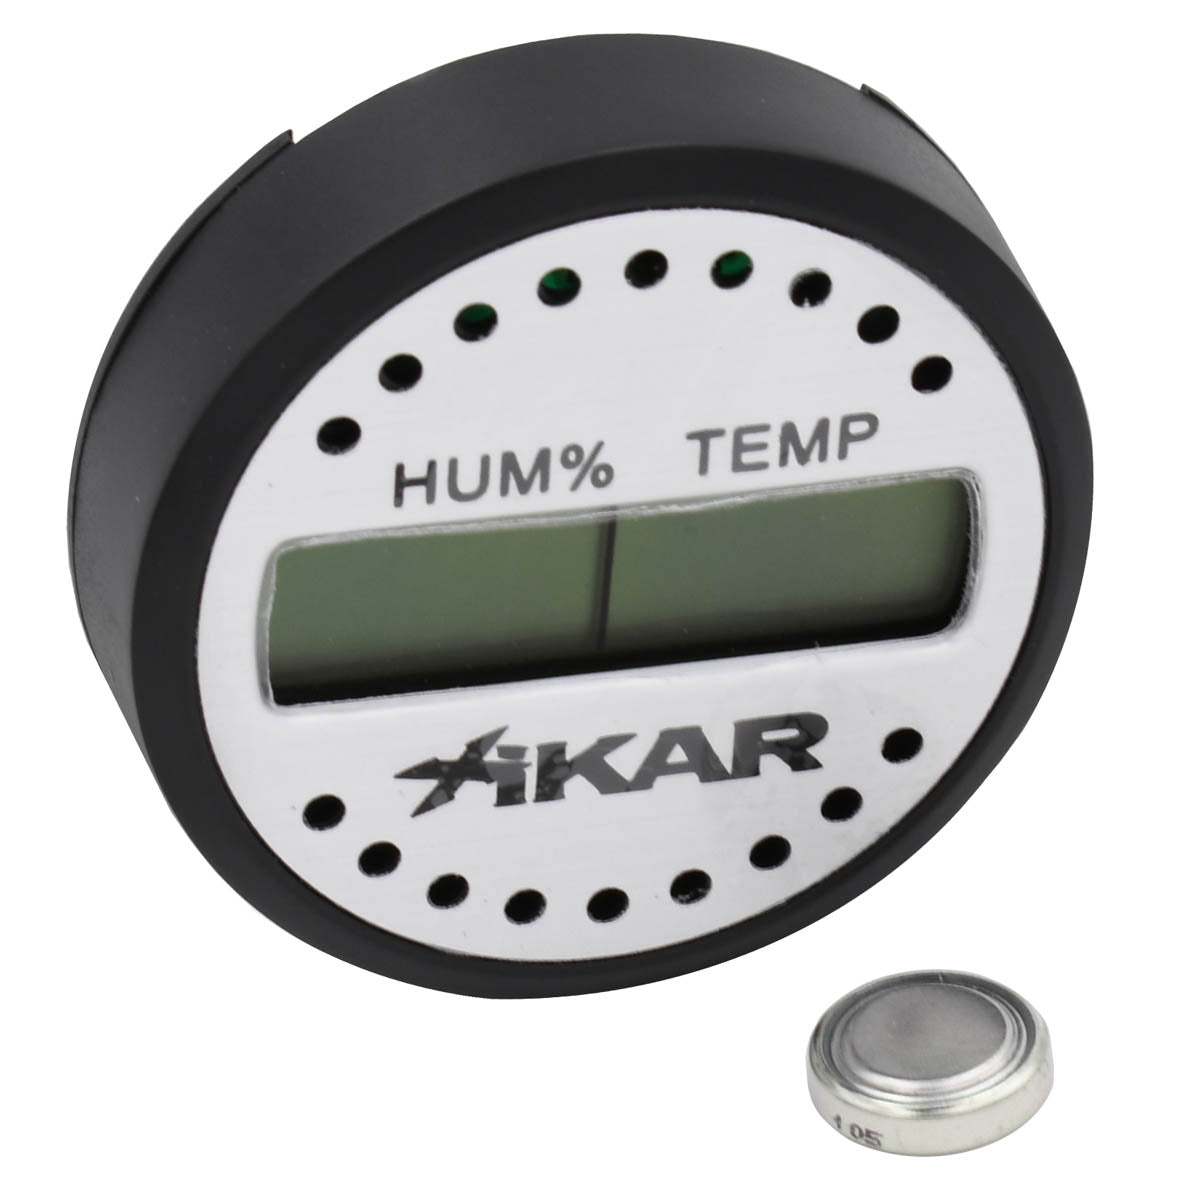 Xikar PuroTemp Digital Gauge Hygrometer, Accurate Right Out of The Box, 15-Second Refresh Rate